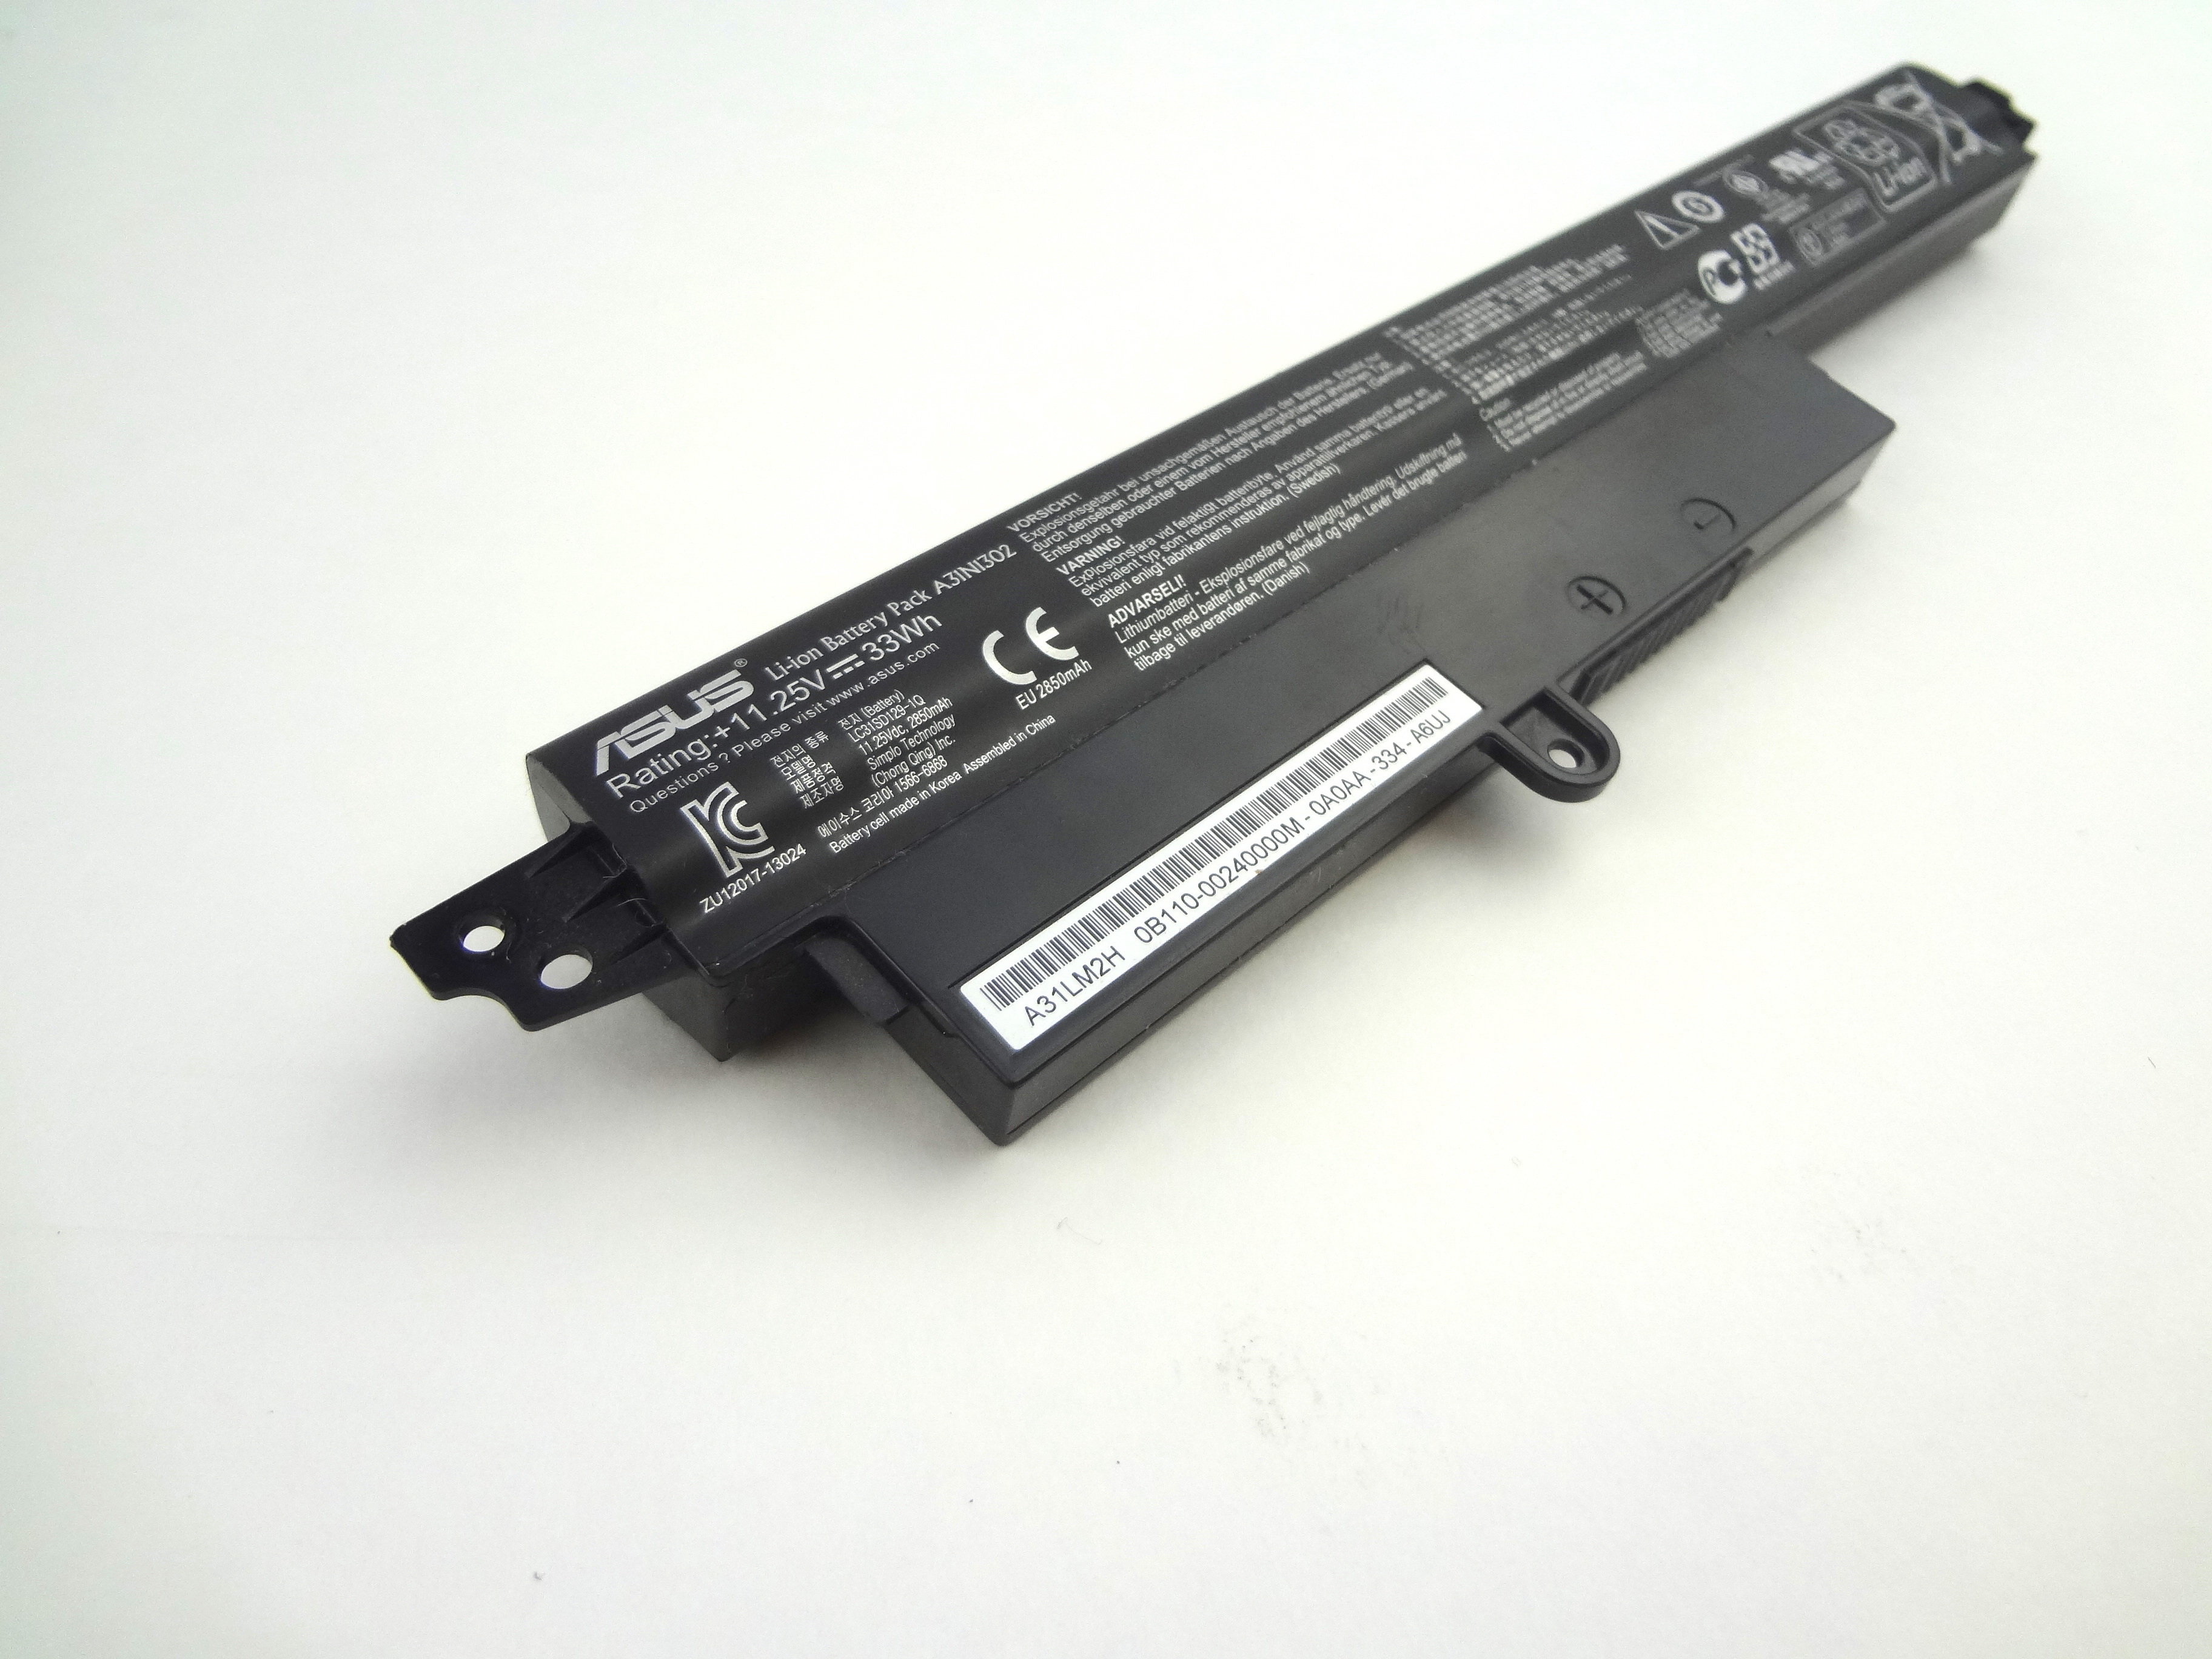 apc 1000xl battery replacement instructions